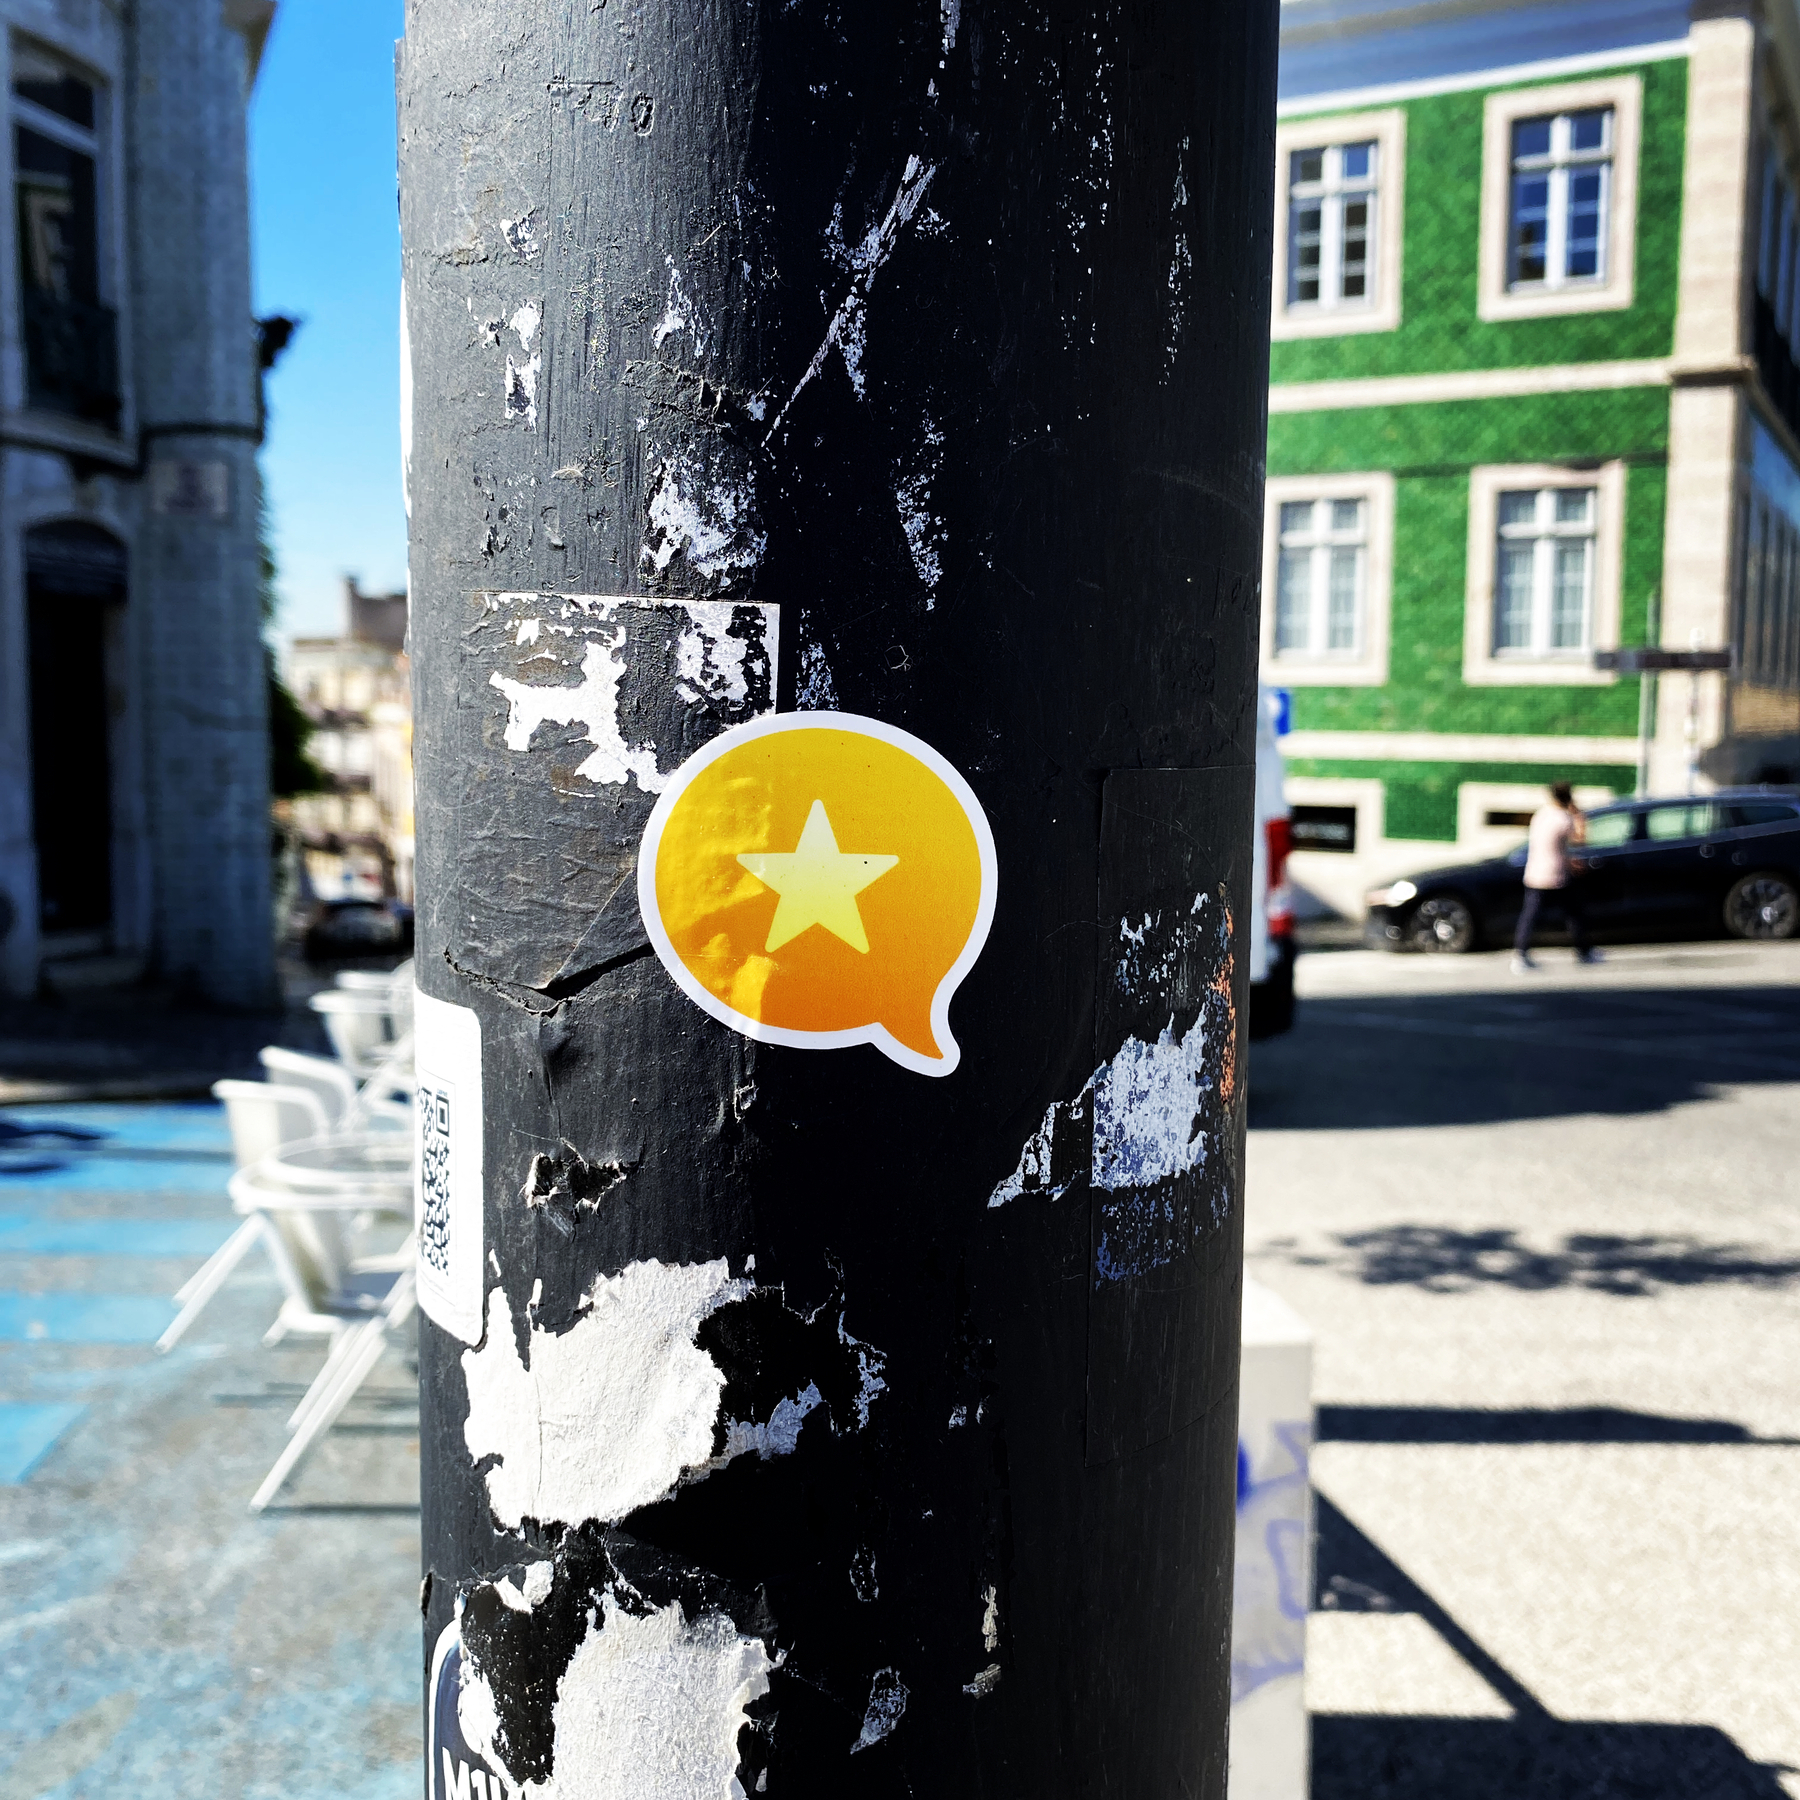 Orange sticker with yellow star on a city lampost